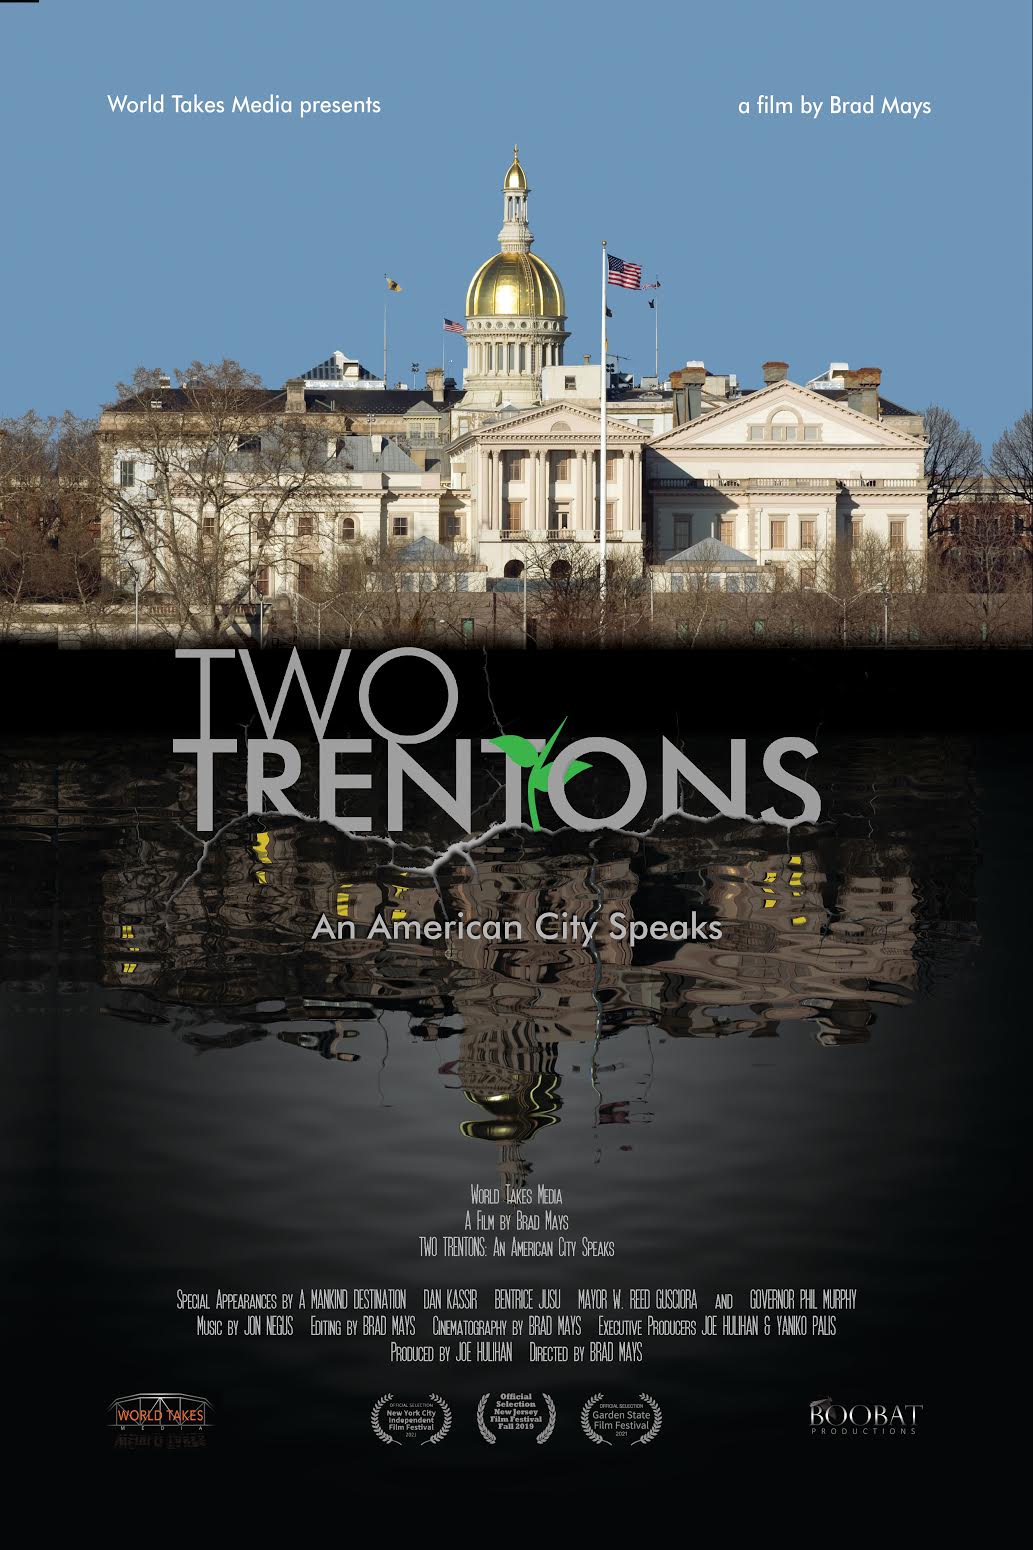 Watch Two Trentons online. “Two Trentons” is a hard-hitting look at a city desperate to redefine itself – through art, music, education, and prison reform – from its all-too-familiar image as a blighted, urban lost cause of decay, violence, hopelessness and moral decline. Featuring numerous interviews with city planners, clergymen, scientists, mental health professionals, artists, musicians, educators, and non-profit volunteers, the experiences of the people who live, work and struggle in Trenton are movingly expressed with eloquence and urgency. “Two Trentons” doesn’t flinch from truth-telling, nor from giving people an opportunity to have their say. Featuring never-before-seen footage of the tragic 2018 Art All Night shooting and aftermath, the film works intellectually, dramatically, and on a visceral level. Filmed across two years, “Two Trentons” looks at the life-defining struggle between mindsets for the survival of a community.